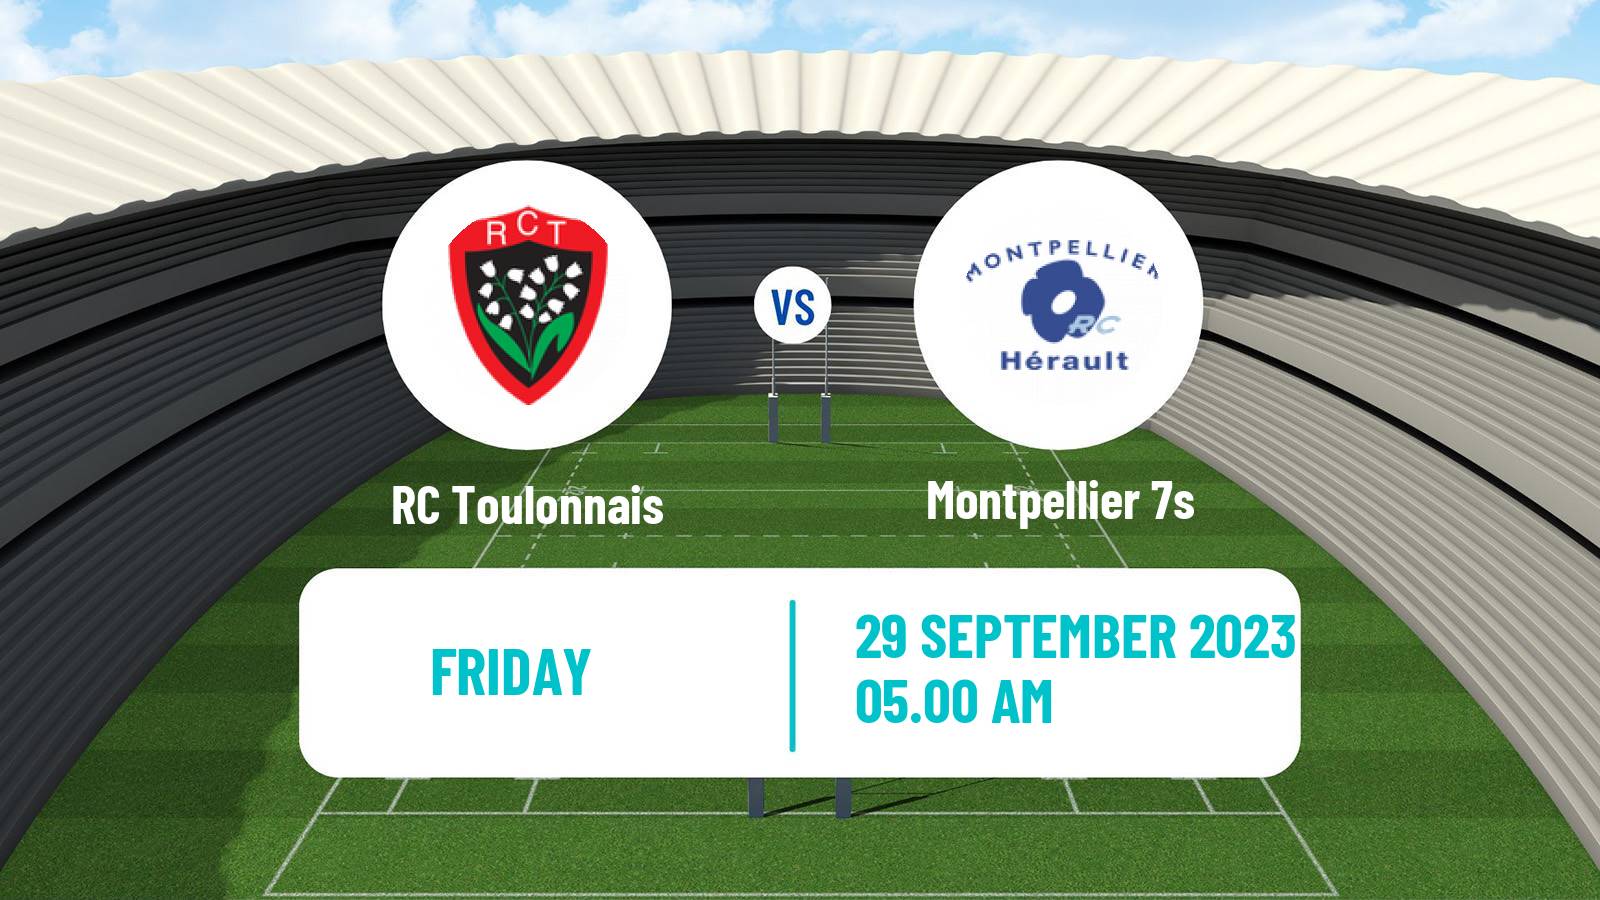 Rugby union French Supersevens 3 RC Toulonnais - Montpellier 7s